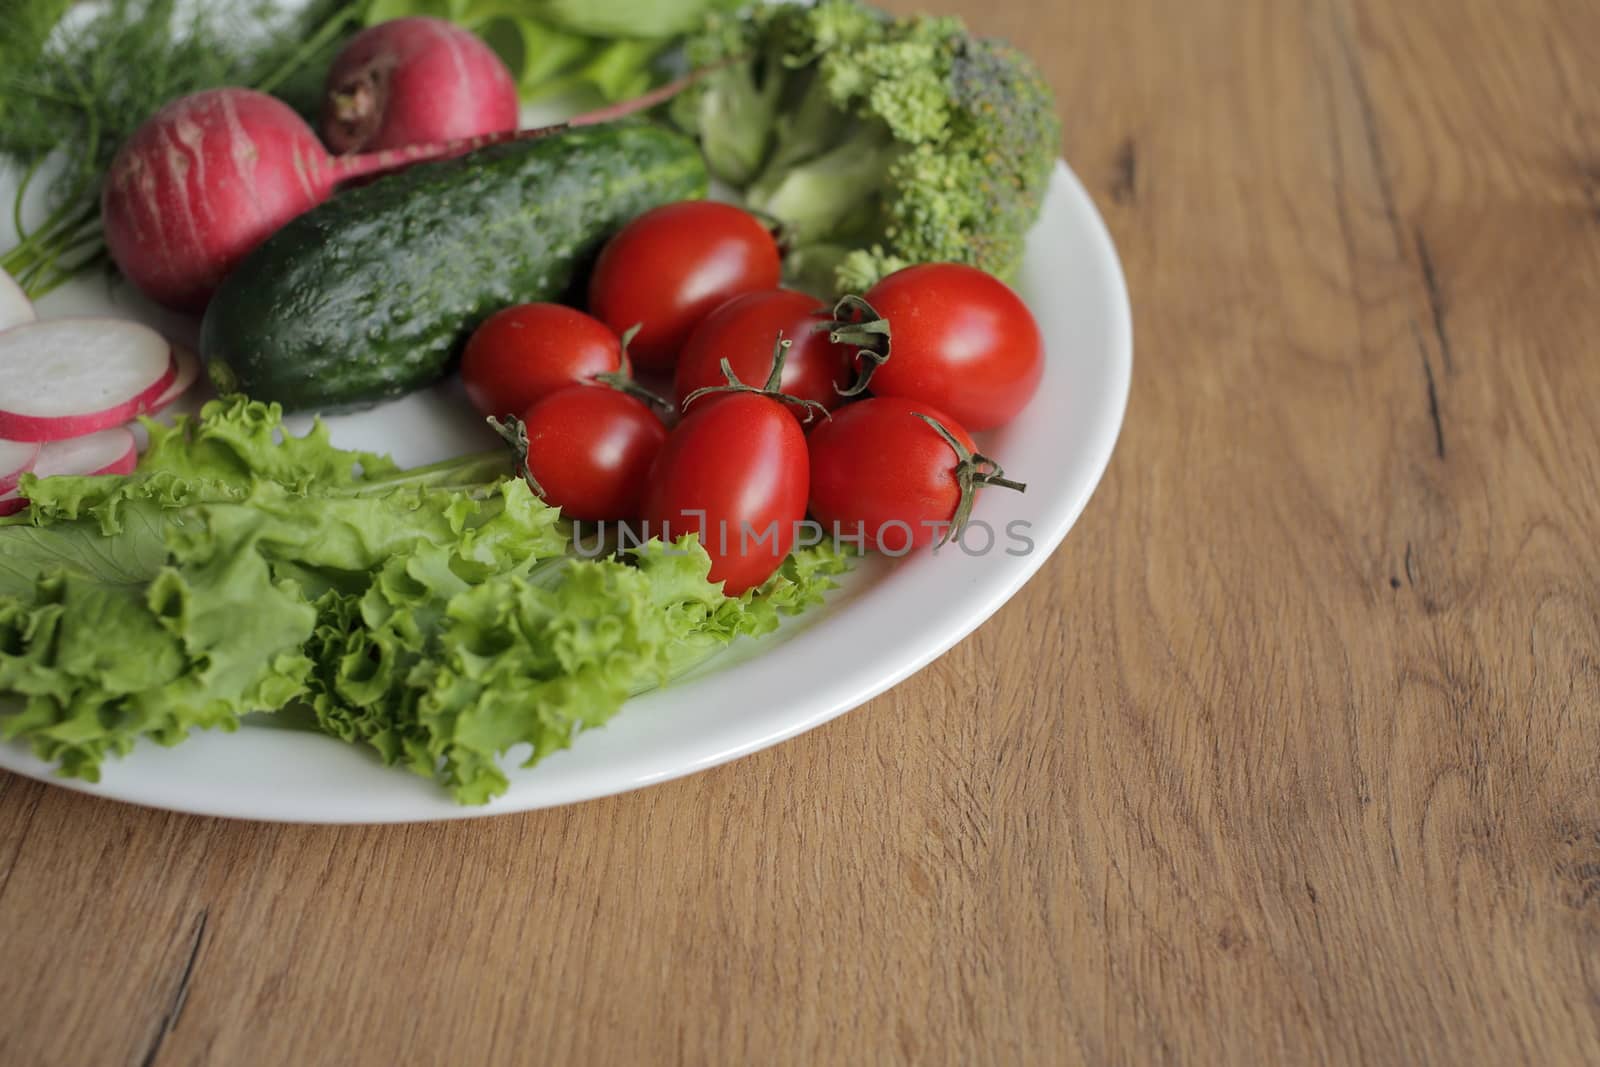 Fresh vegetables in a white plate on a wooden table. Tomatoes, cucumber, lettuce, broccoli, radish